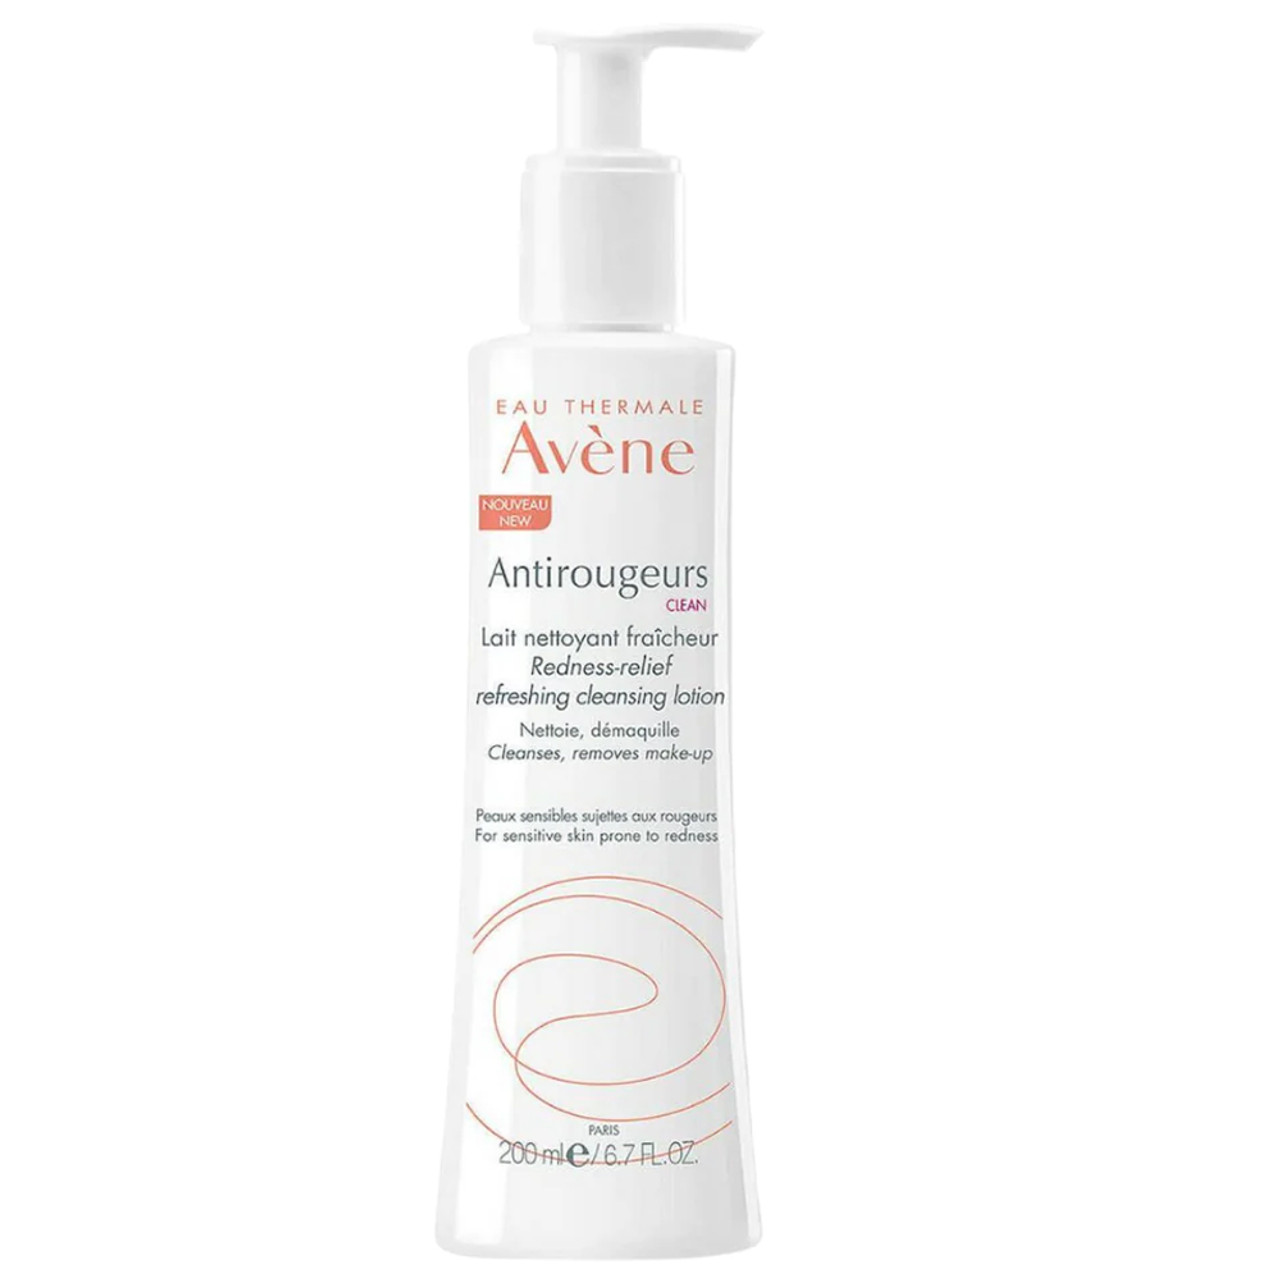 Avene Antirougeurs CLEAN Redness-Relief Refreshing Cleansing Lotion 200 mL